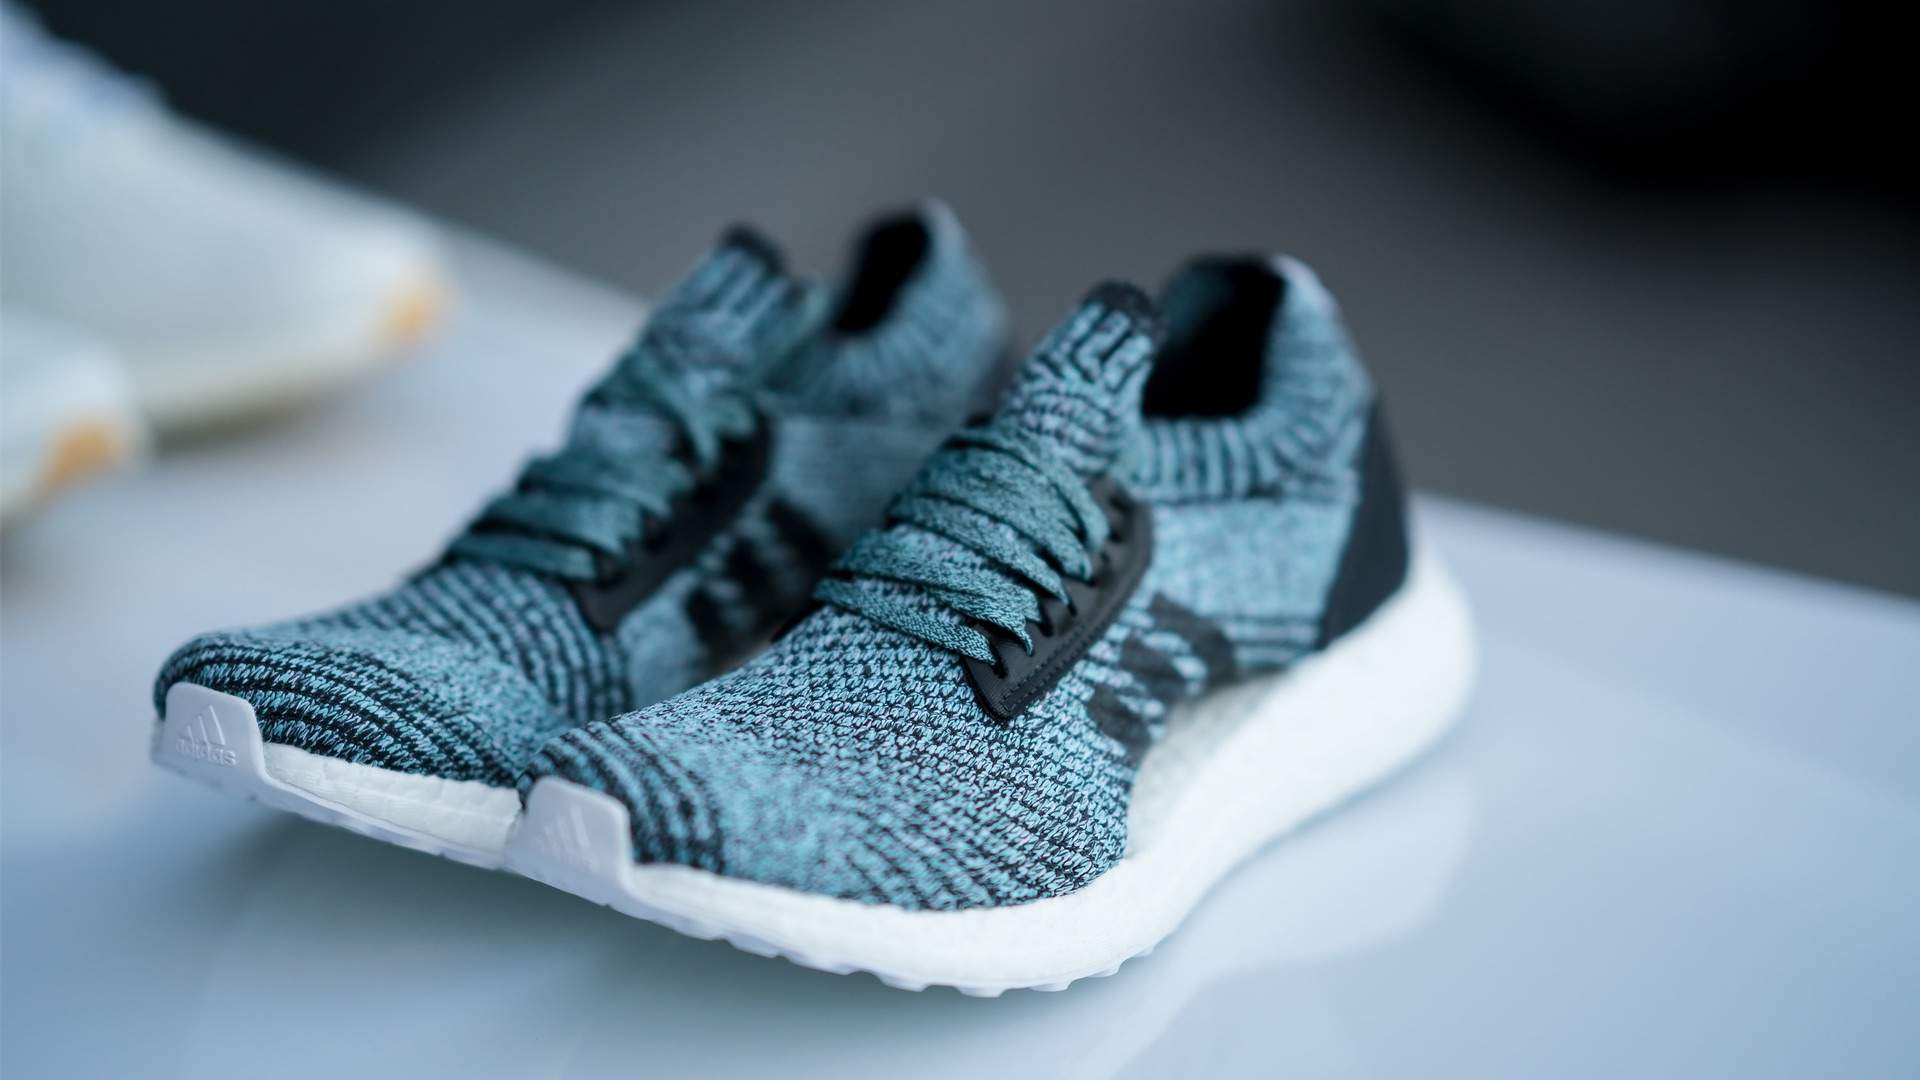 Adidas' New Kicks Are Made From Recycled Ocean Plastic